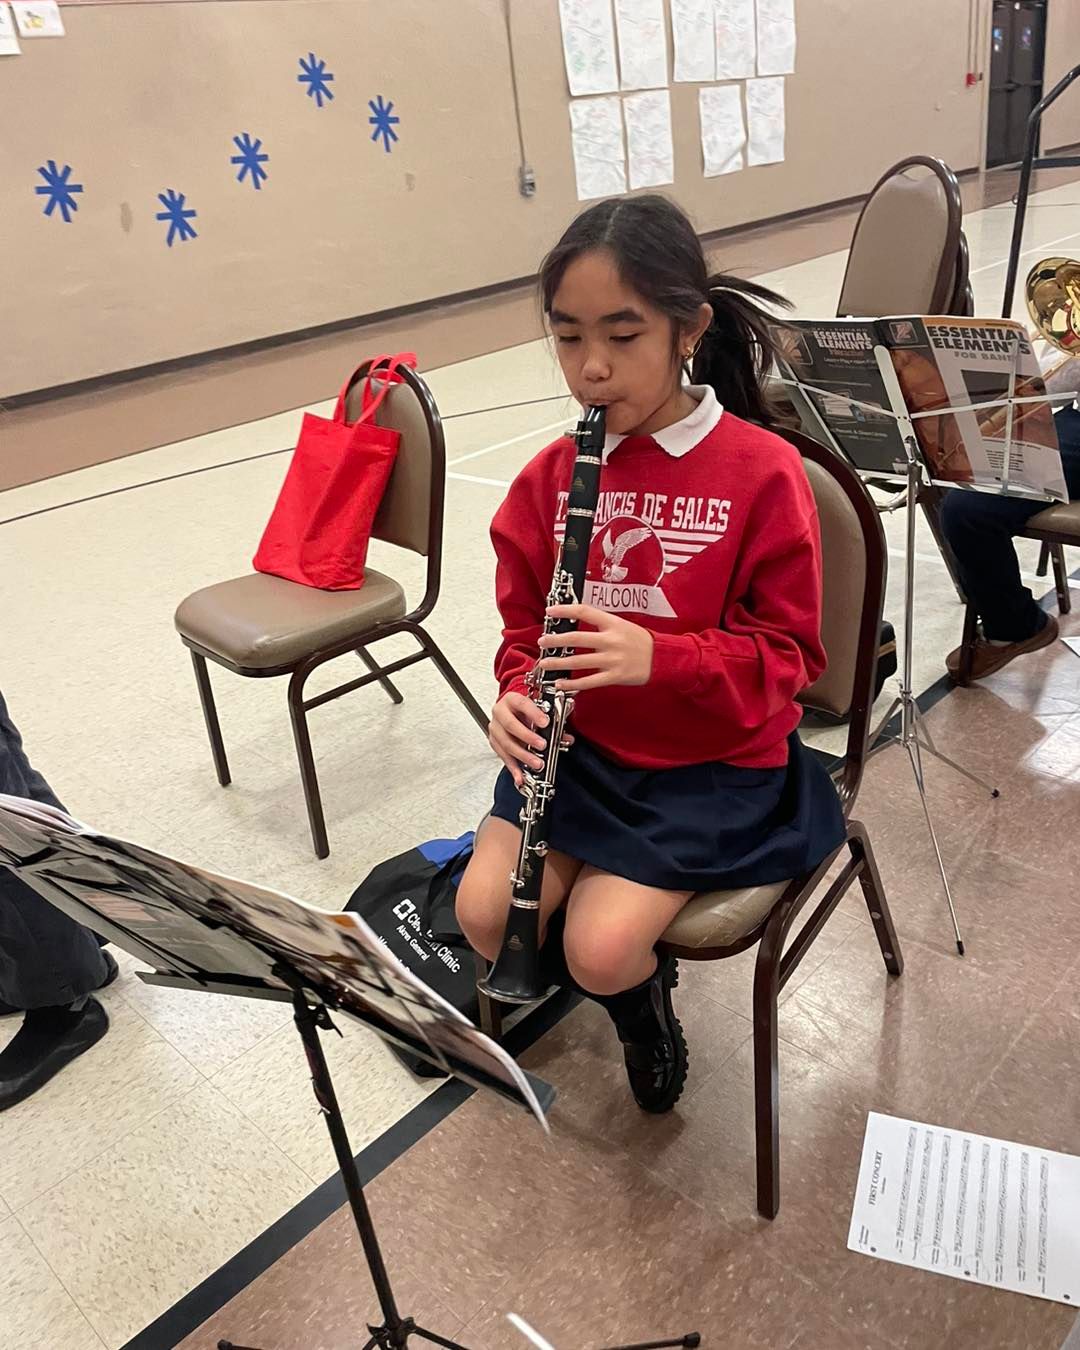 student playing clarinet